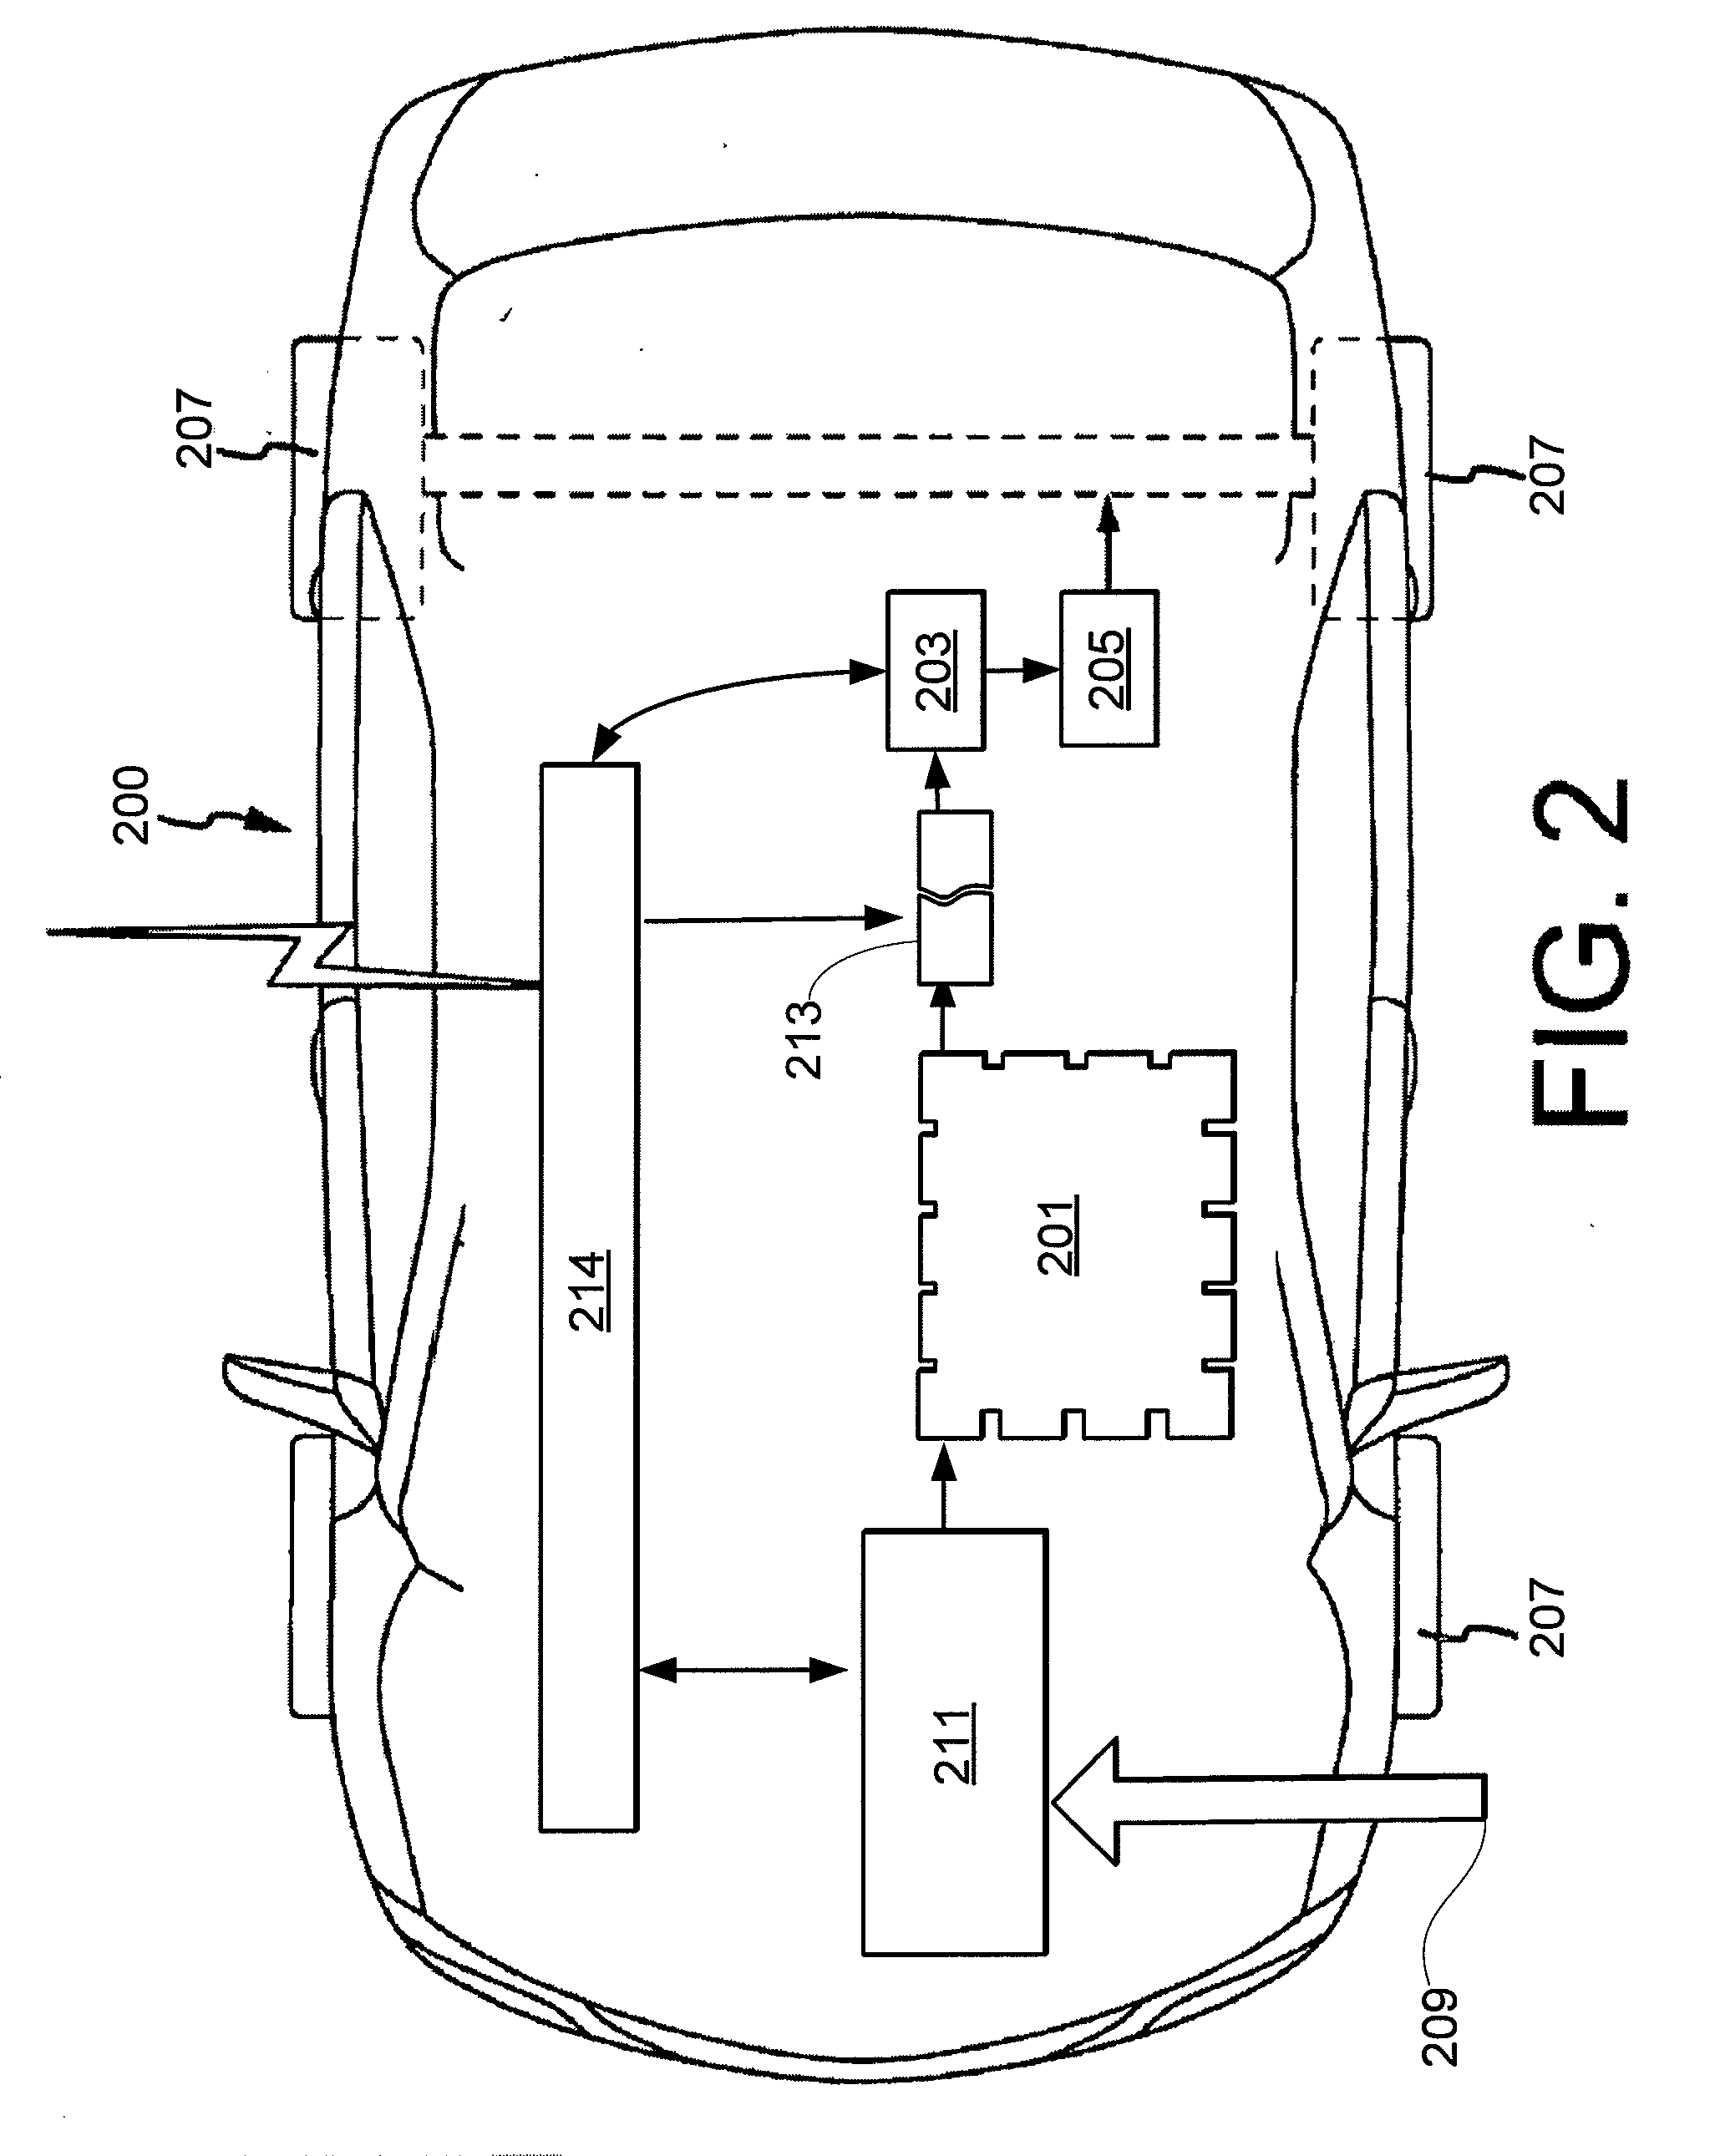 System and method for providing discharge authorization to a battery-powered vehicle via a telematics system